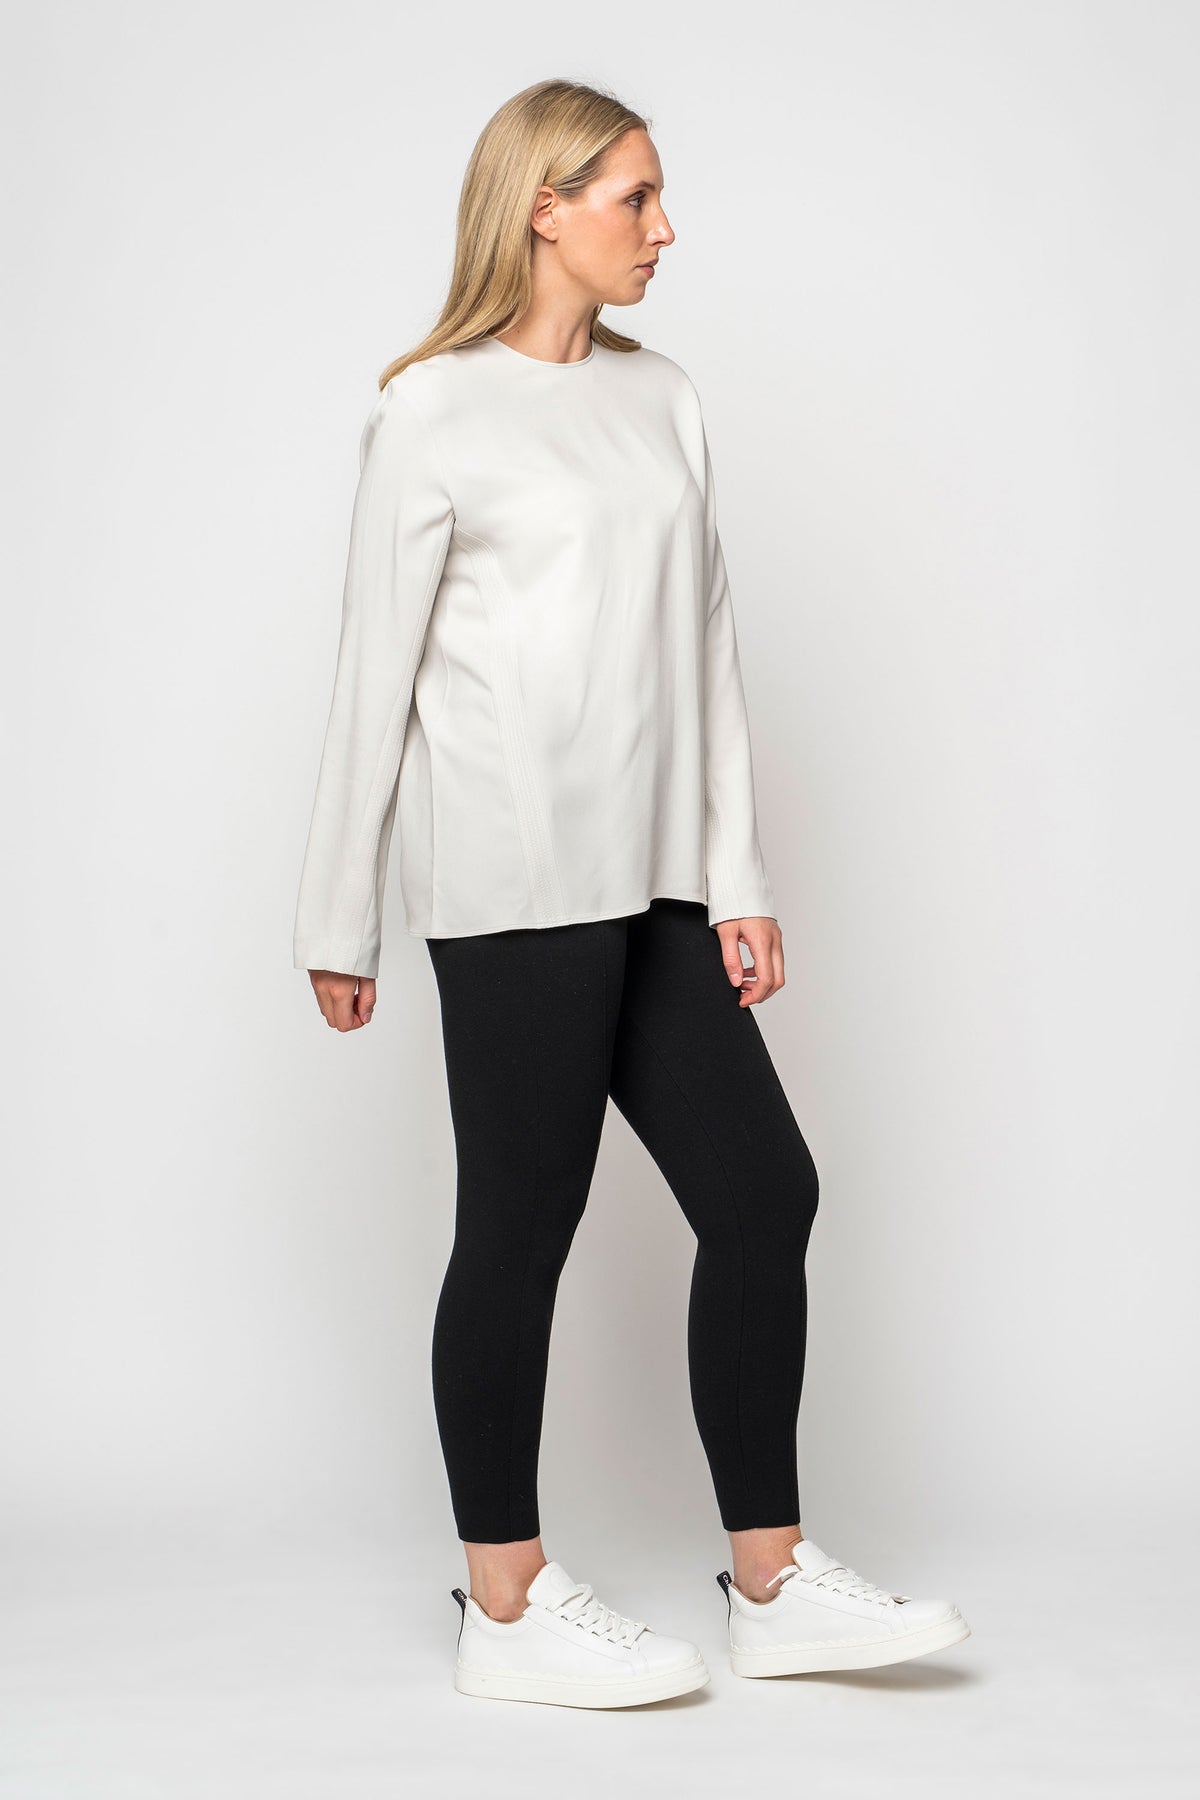 Stella McCartney Light Grey Longsleeve Blouse With Side Embroidery Detail